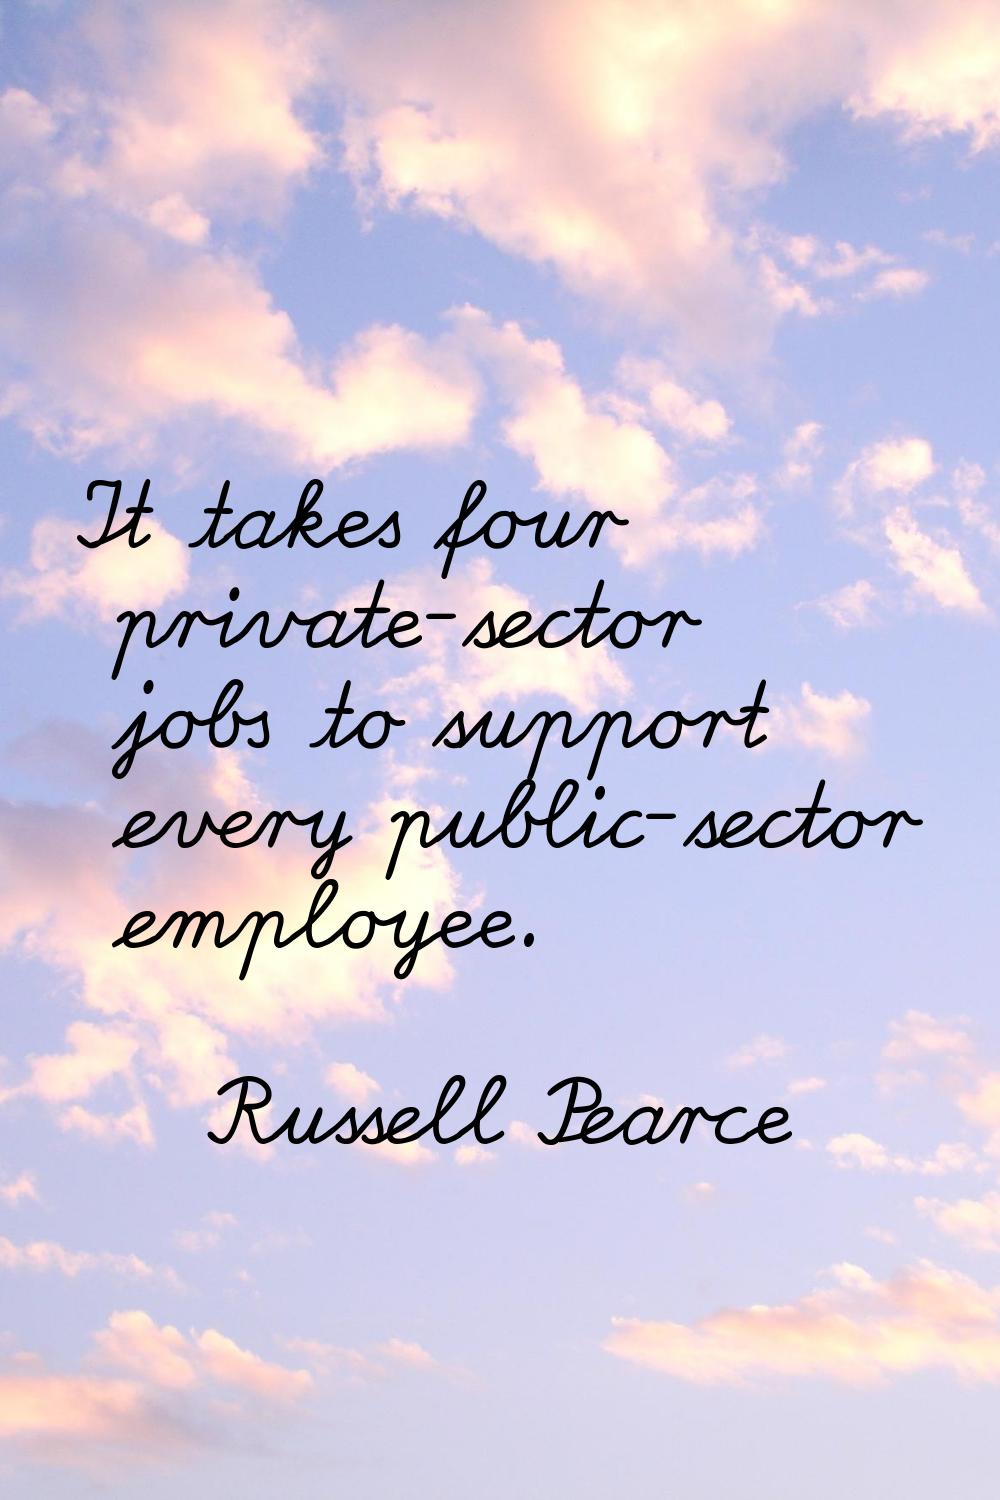 It takes four private-sector jobs to support every public-sector employee.